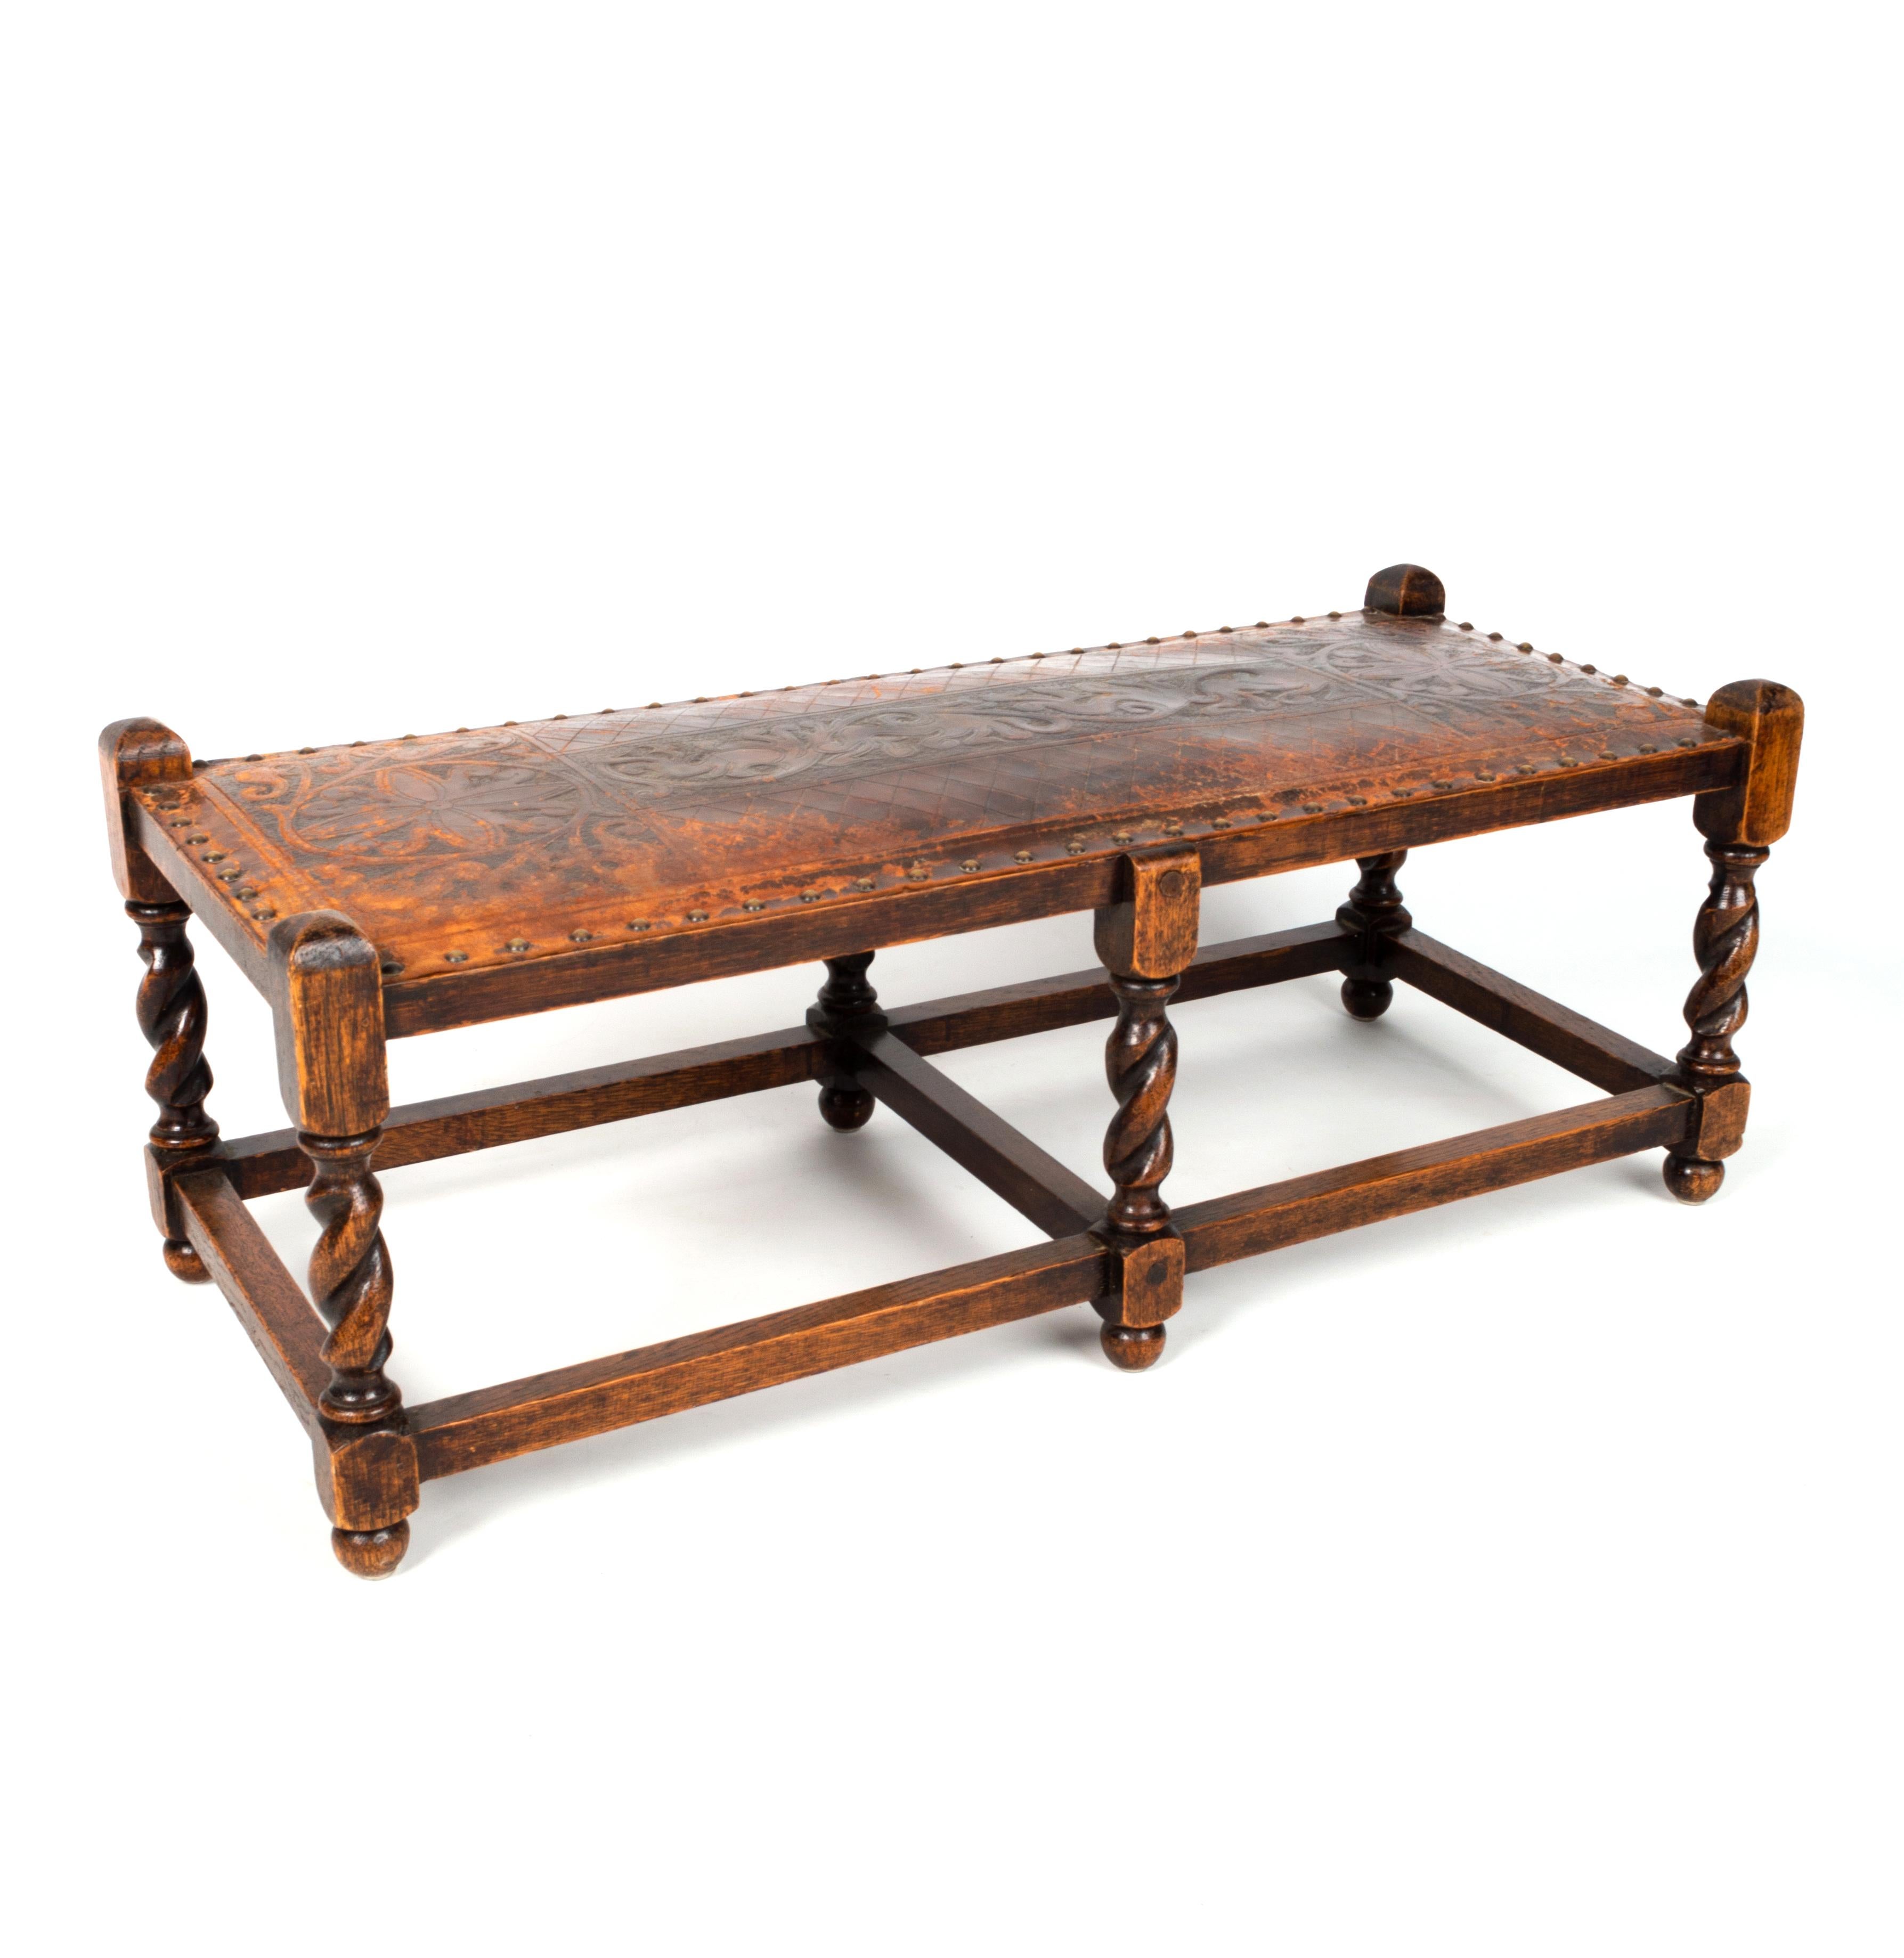 Antique French Oak Barley Twist Bench Stool Ottoman Seat Embossed Leather C.1900 For Sale 4